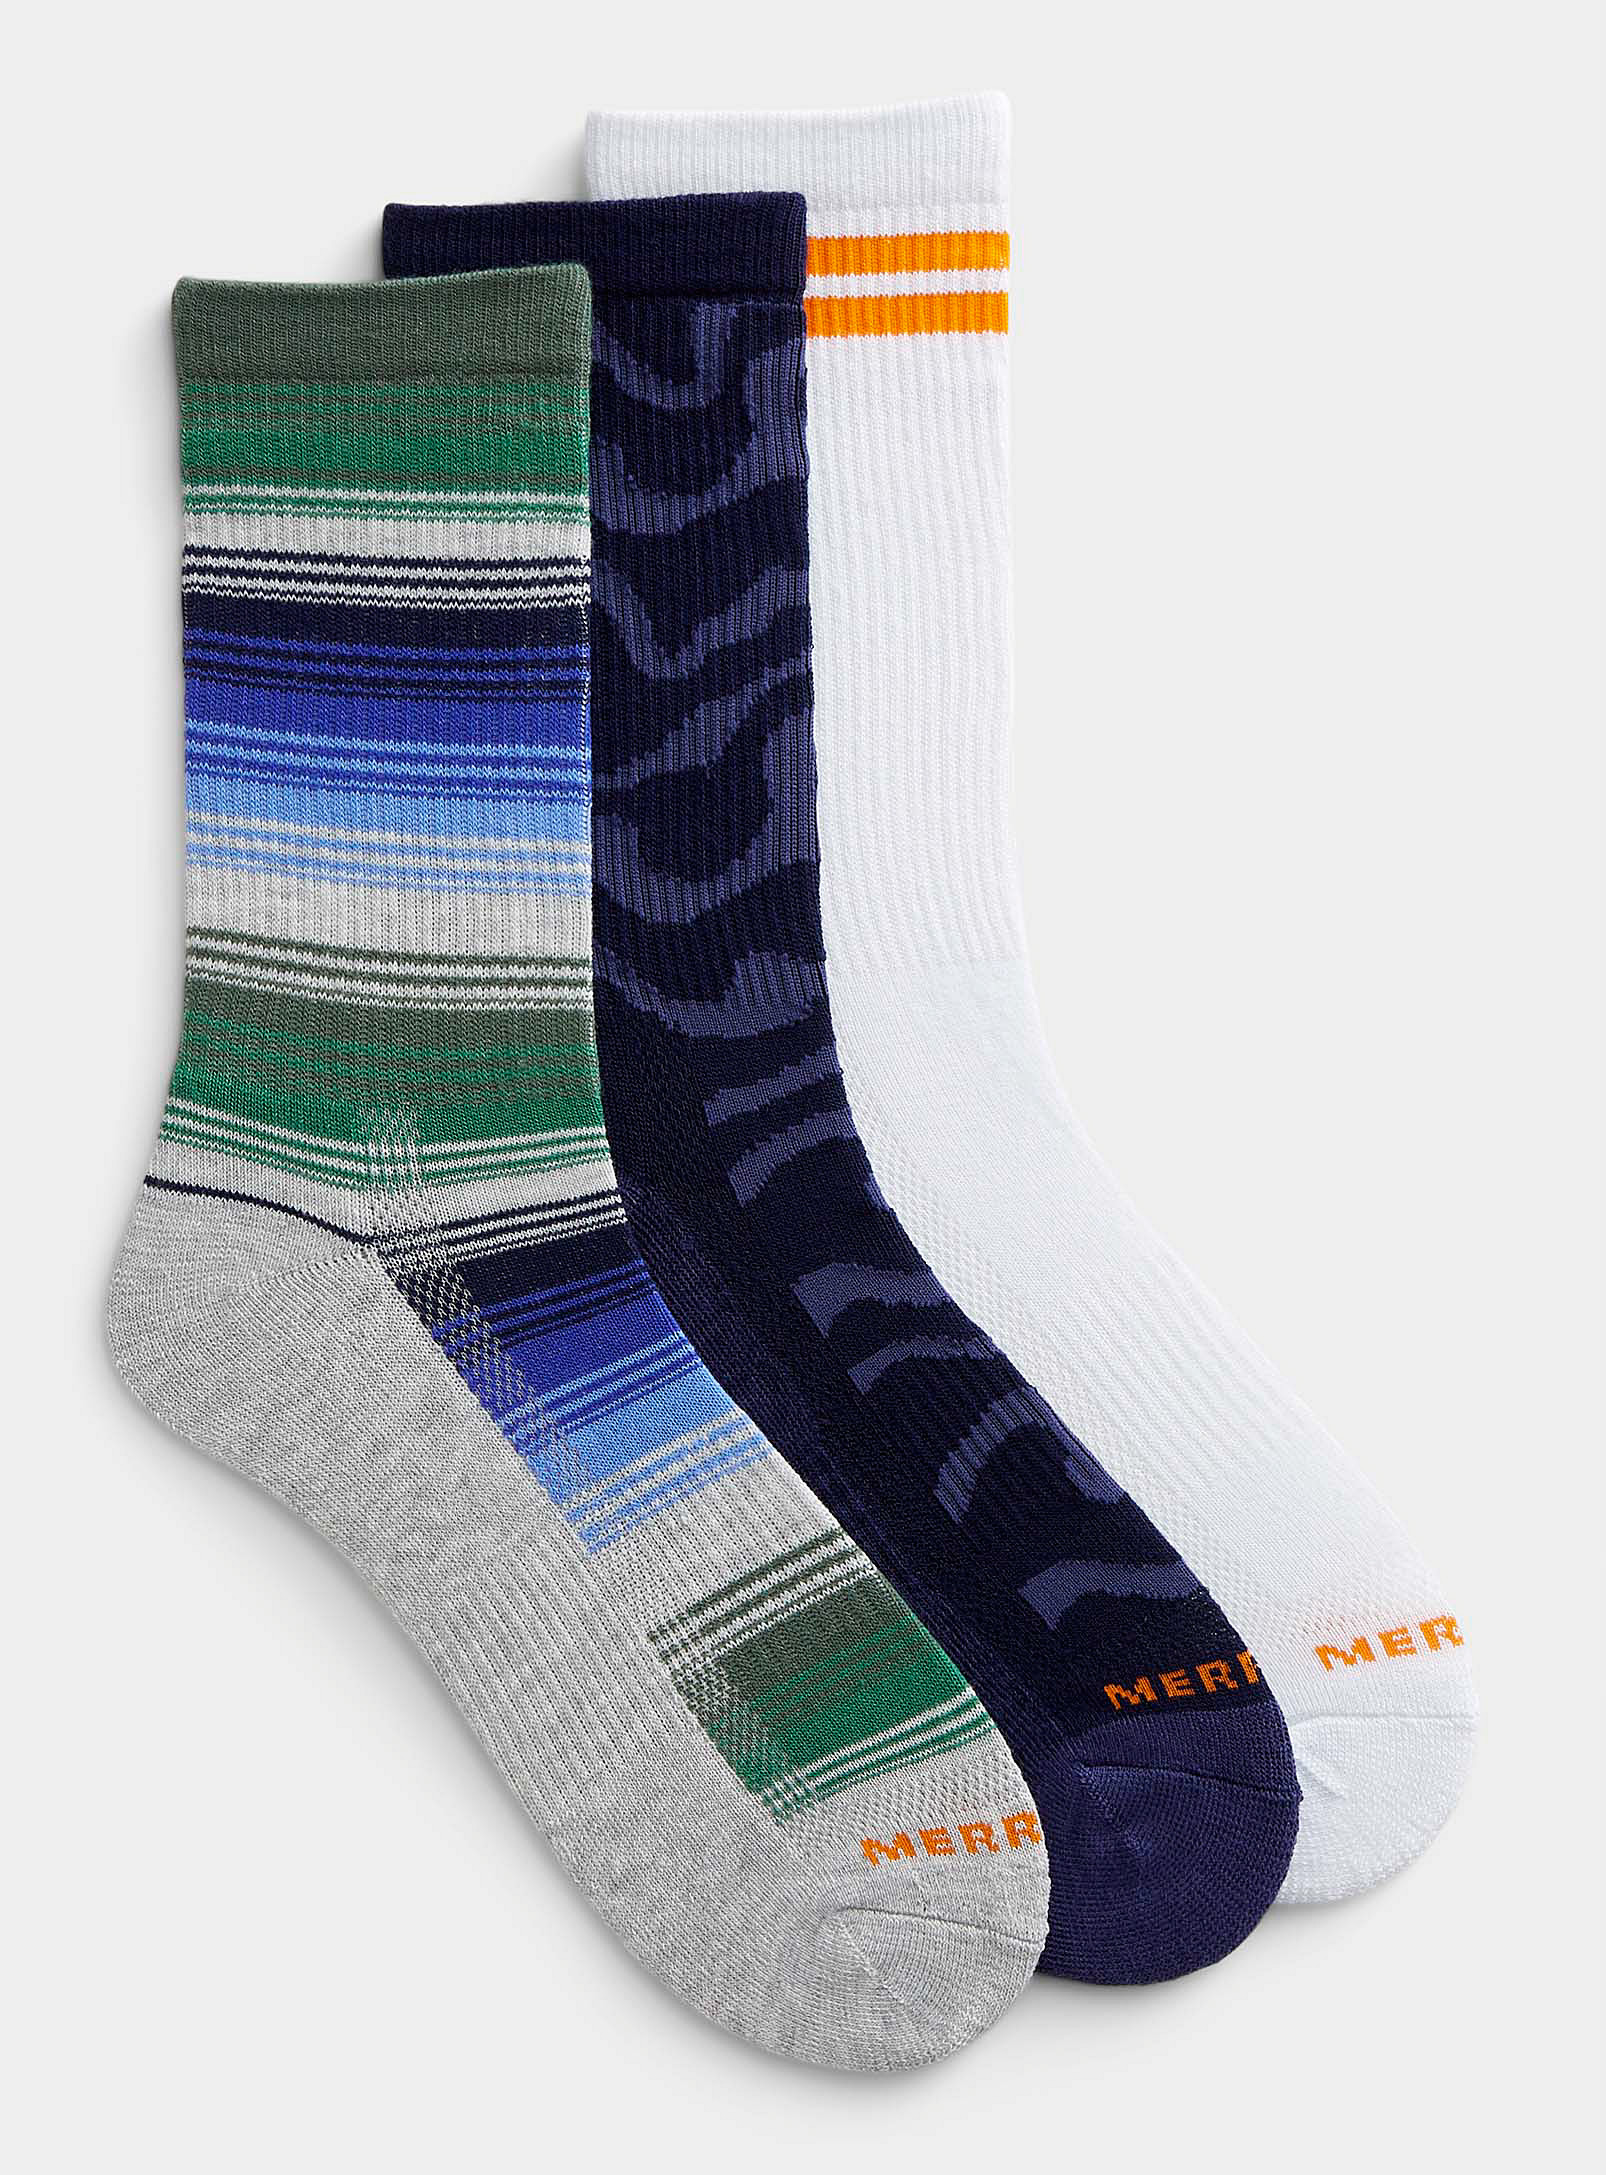 Merrell - Men's Mixed-stripe reinforced socks Everyday collection - 3-pack